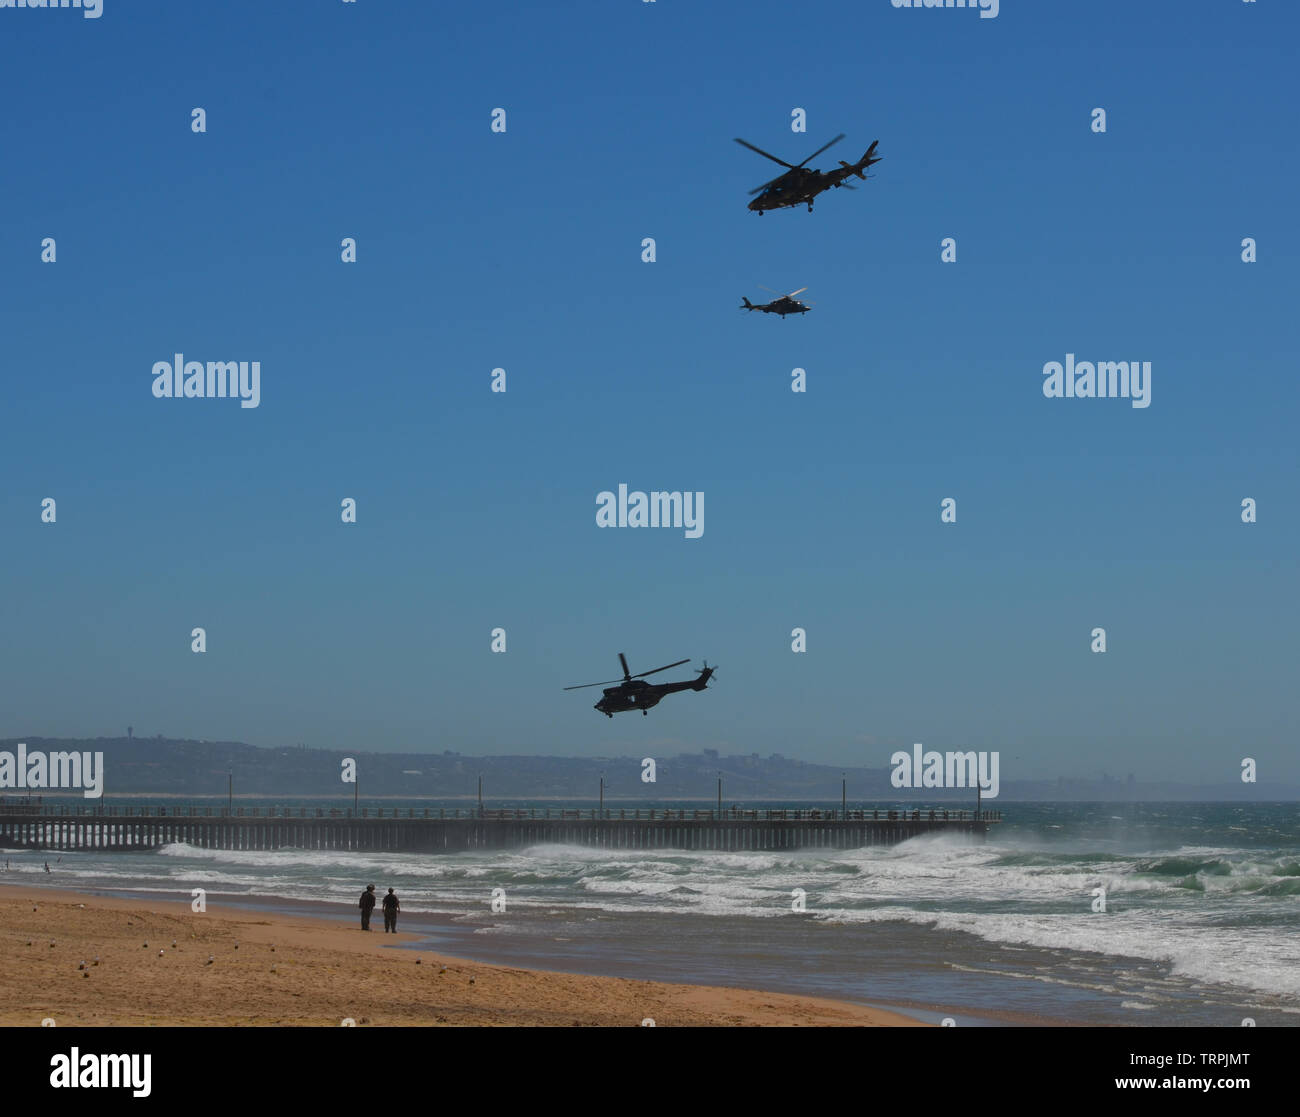 North Beach, Durban, South Africa, 17th February, 2017. A public Land, Sea and Air display presented by the South African Defence Force created stunning military tableaux on Durban's beachfront. Members of the army, navy and air force staged a combined beach invasion to the amazement and delight of residents and visitors alike. Picture: Jonathan Oberholster/Alamy Stock Photo